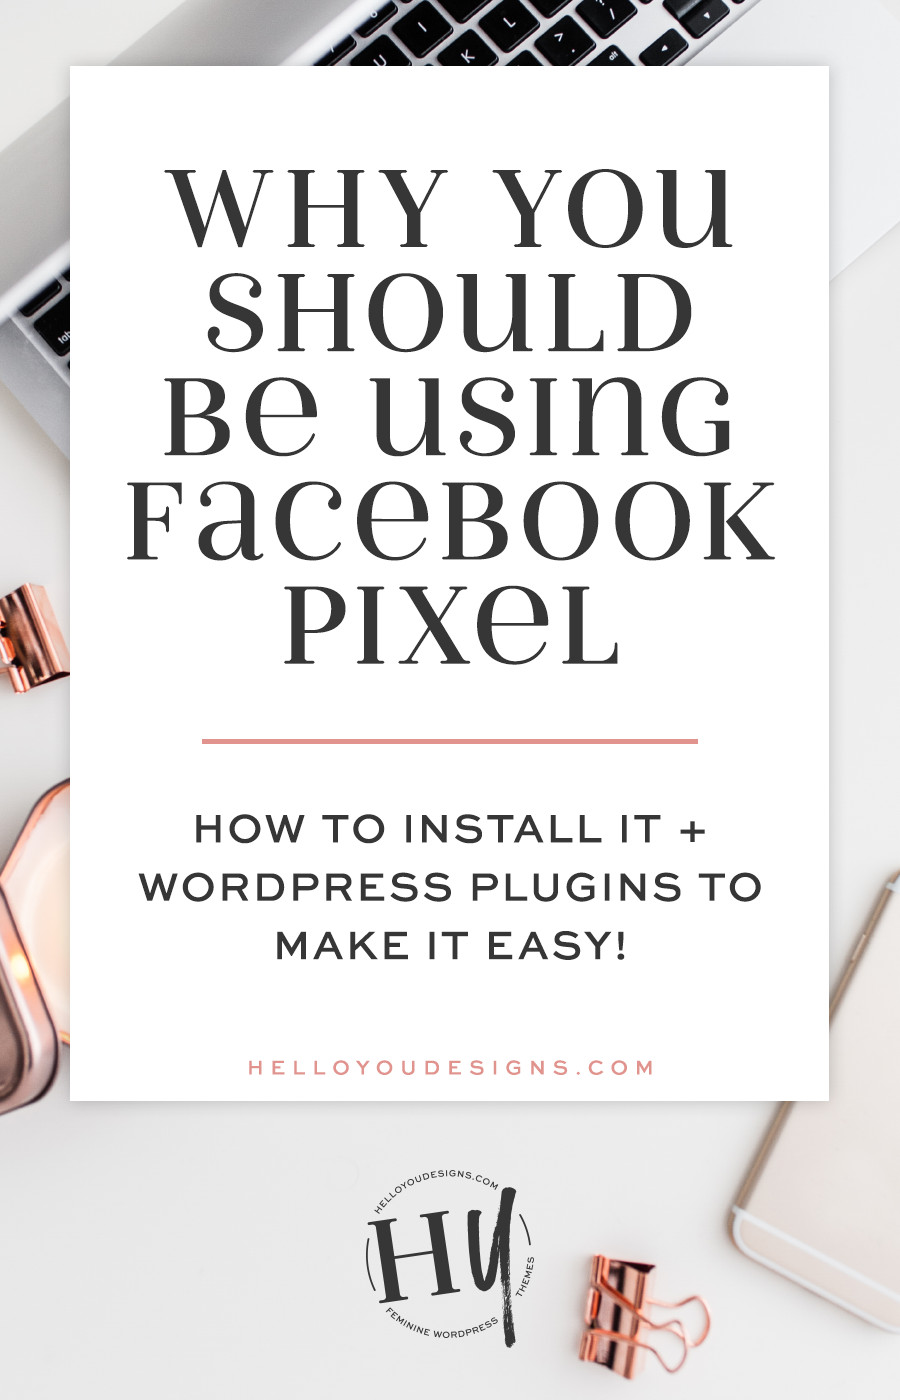 Why you should be using Faceook Pixel